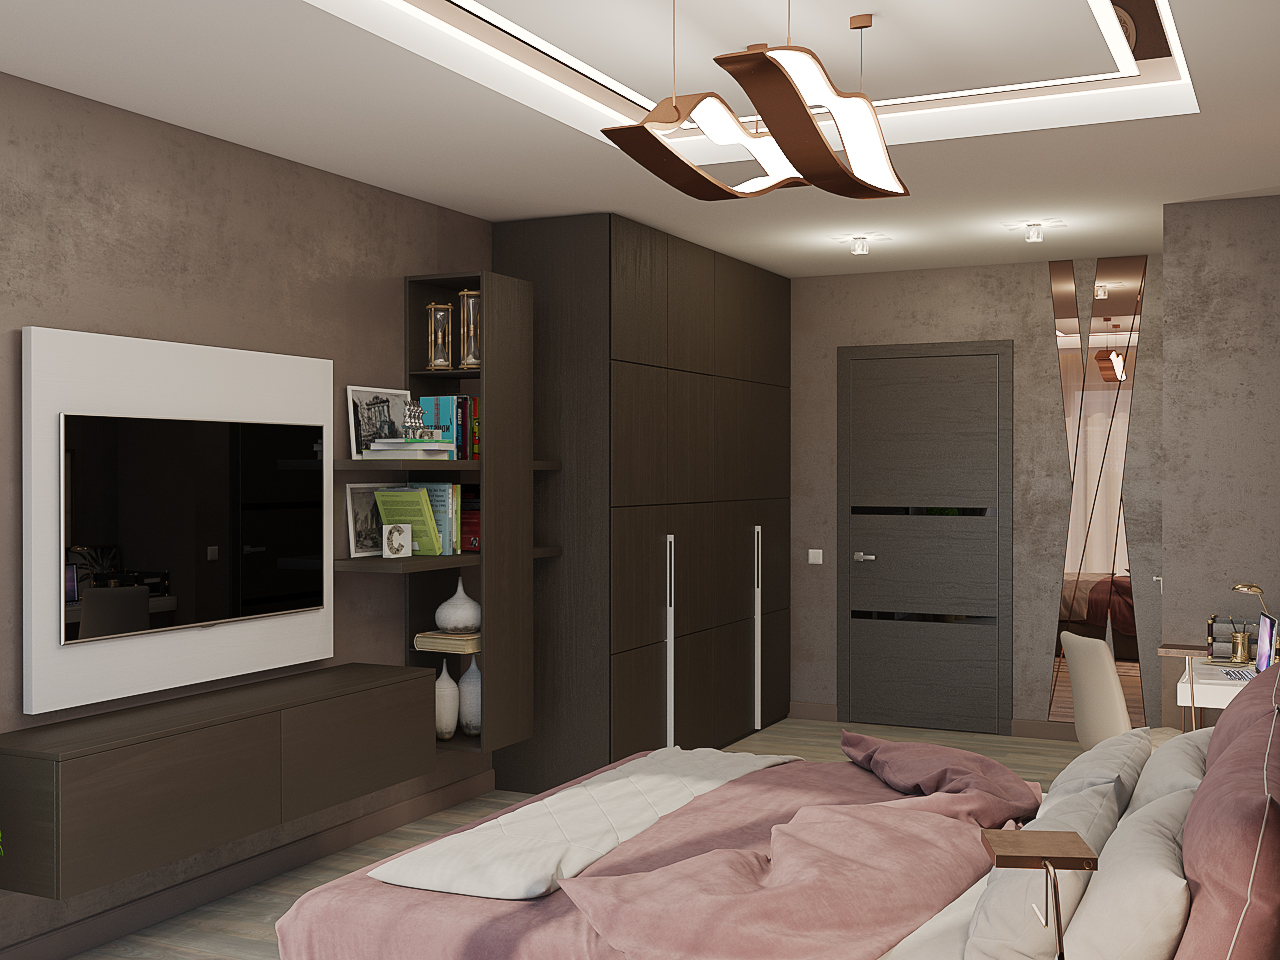 Bedroom in hotel style in 3d max vray 3.0 image